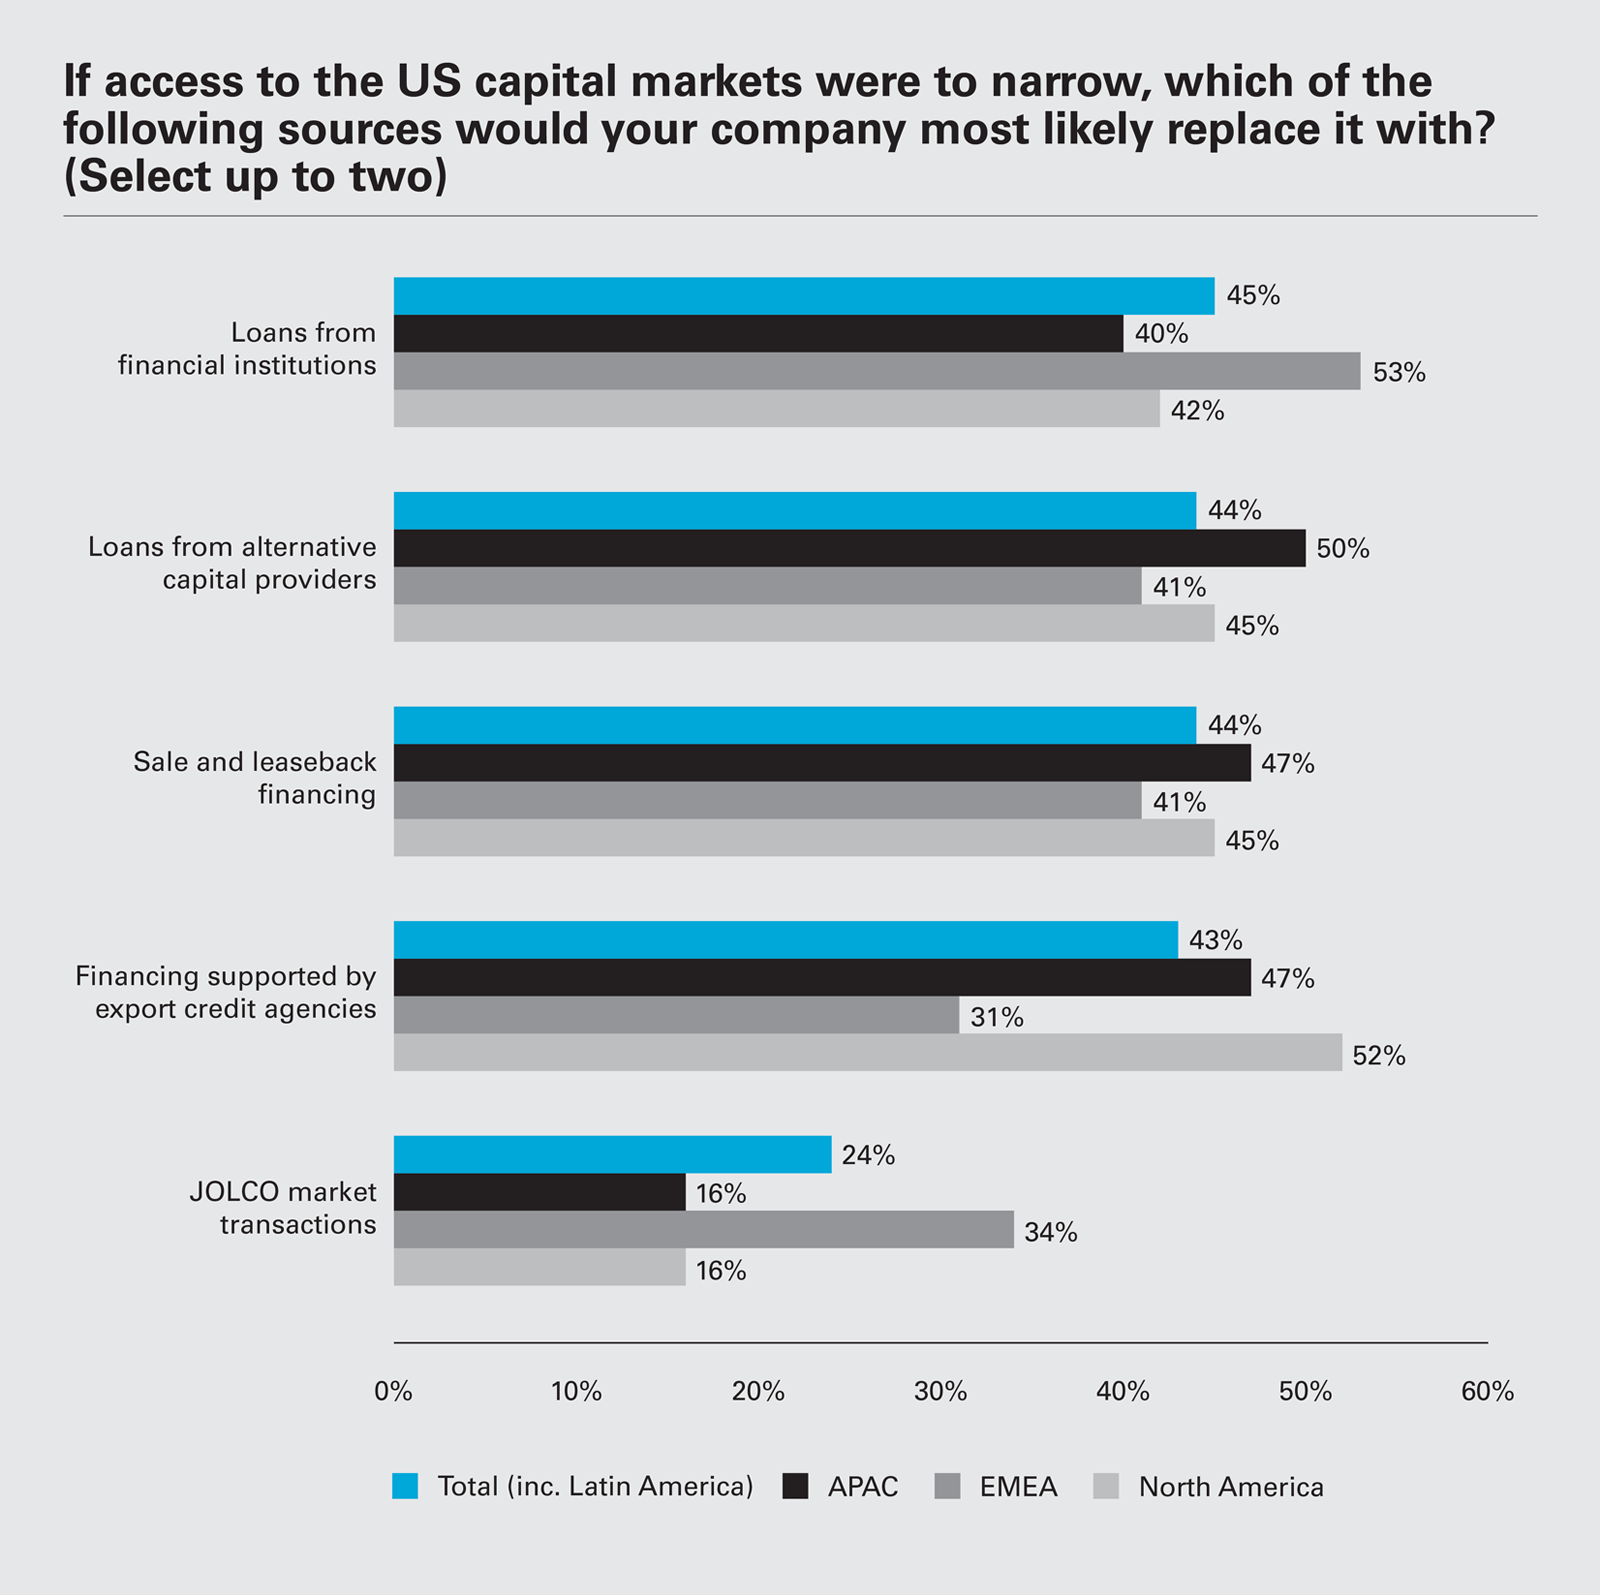 If access to the US capital markets were to narrow, which of the following sources would your company most likely replace it with? (select up to two)